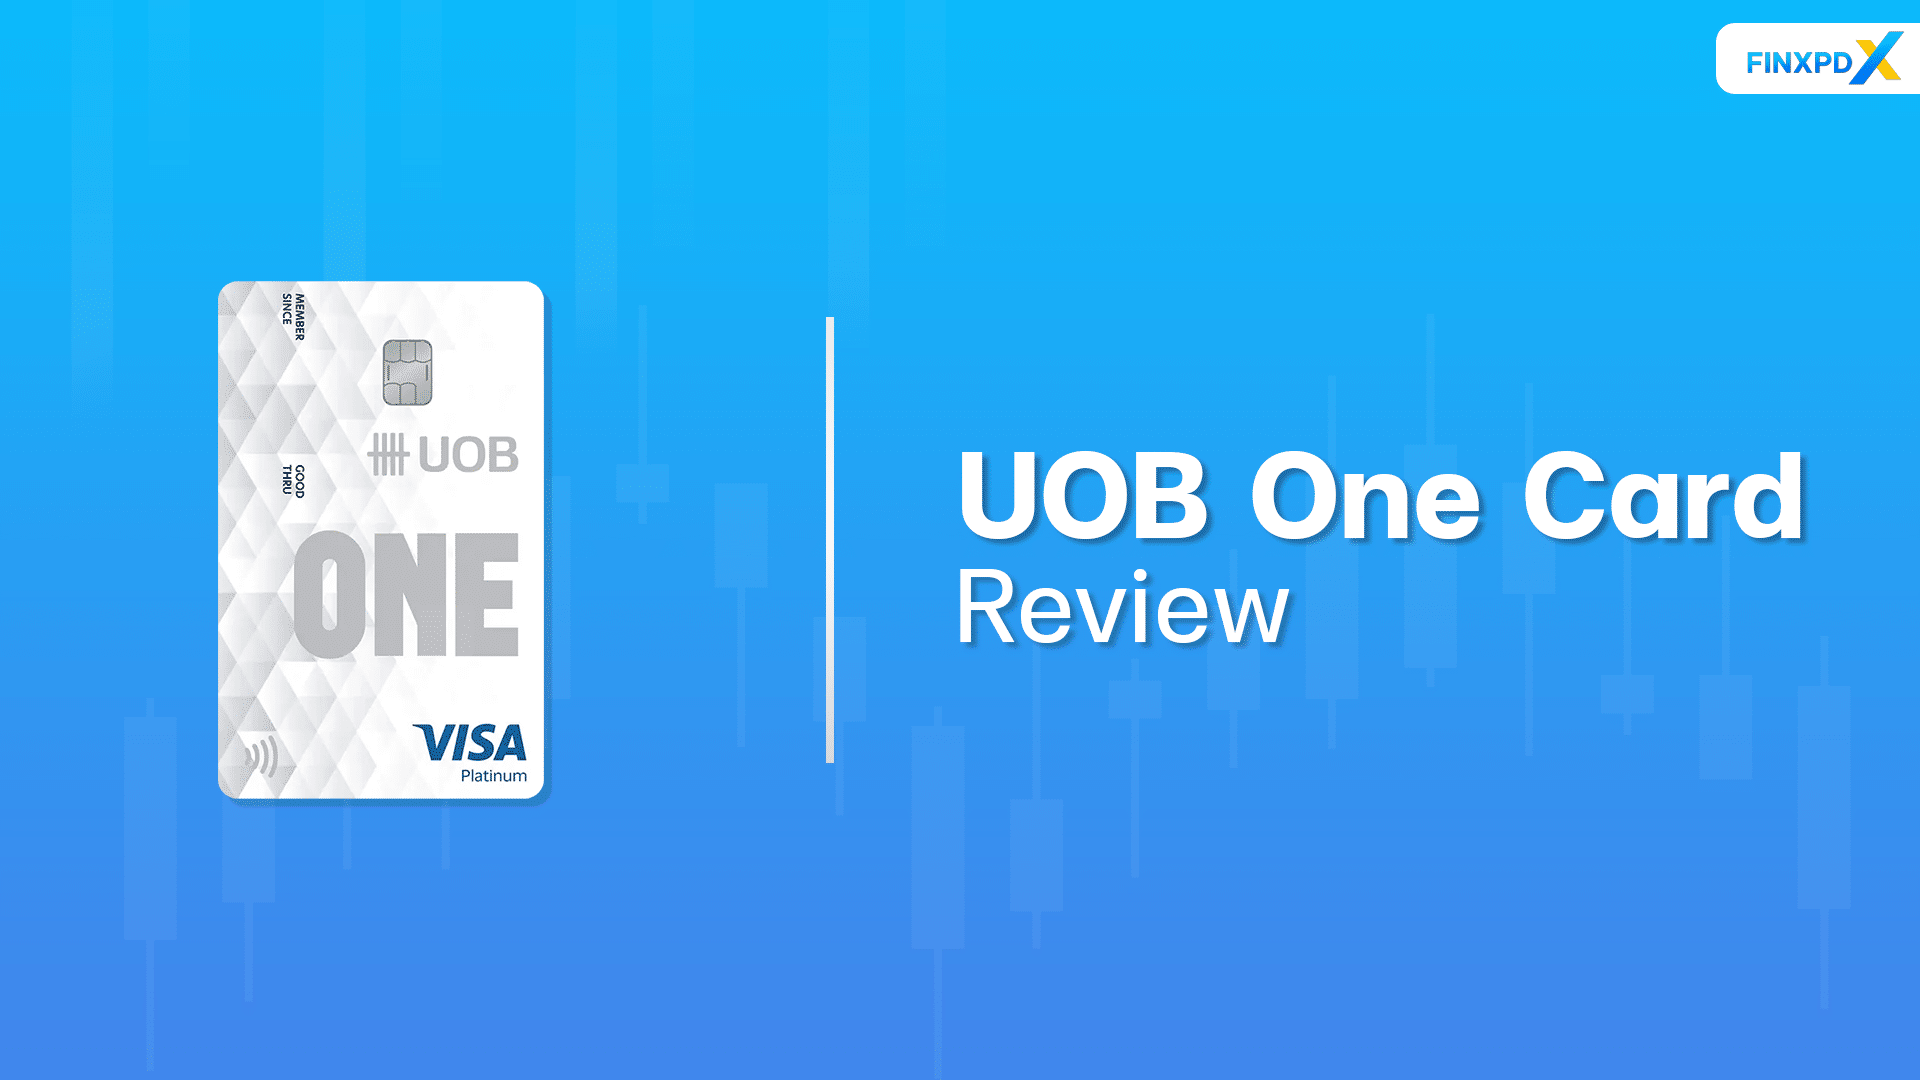 UOB One Card Review